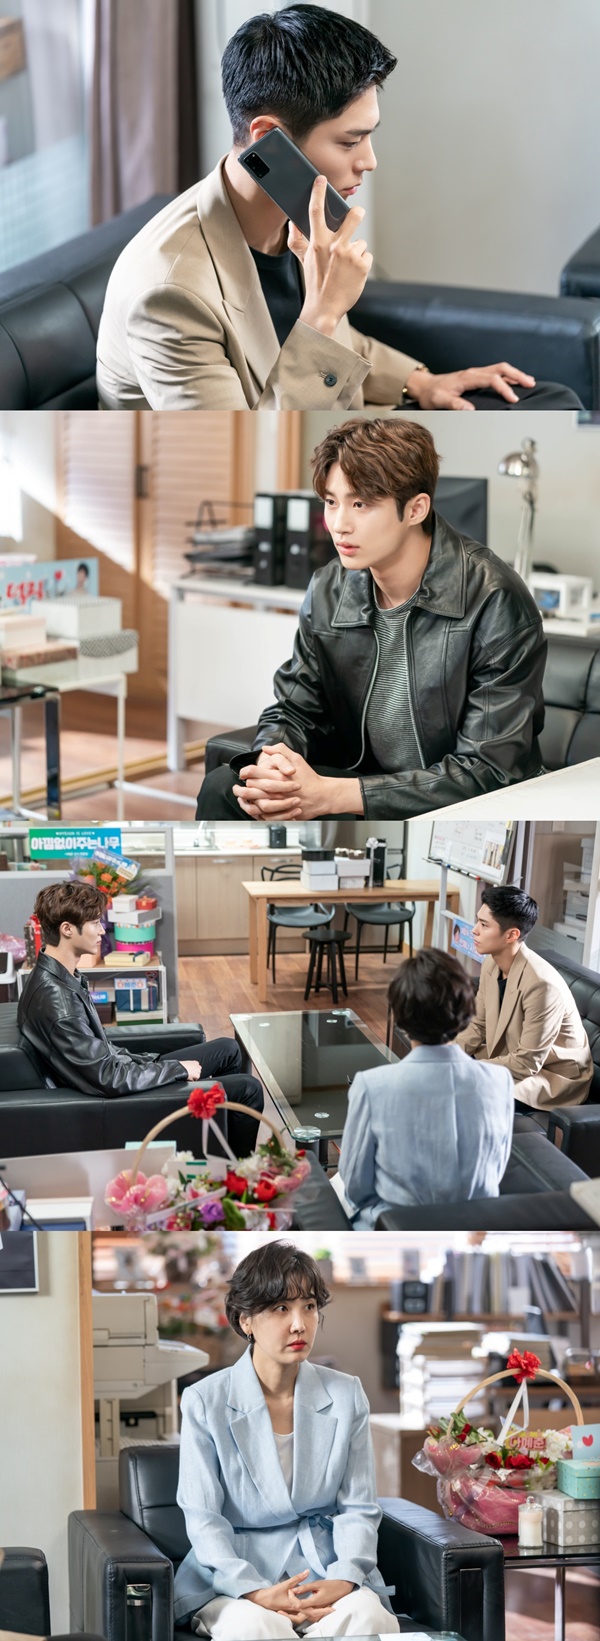 The Record of Youth Park Bo-gum, Wooseok, is hit.TVN Mon-Tue drama Record of Youth (played by Ha Myung-hee, directed by Ahn Gil-ho) released the images of Sangers Sa Hye-joon (Park Bo-gum) and Won Hae-hyo (Wooseok) on the 12th.The day I have never seen before, I am curious about the nerves.In the last broadcast, Sa Hye-joon won the best performance award by succeeding in the drama The Return of the King.Sa Hye-joons unstoppable Shus move, which has achieved Actors dream over the cold reality, gave a thrilling Qatarsis. However, unexpected trials came.The news of Charlie Chung (Lee Seung-jun)s death, which was taken by Sa Hye-joon at the moment of enjoying happiness, amplified his curiosity about future development.In the meantime, the tension of Champon Entertainment is caught, further heightening the sense of Danger.The hard face of Sa Hye-joon, who is talking to someone, makes him guess the unusual incident that came to him.With the silence flowing, Sa Hye-joon and Won Hae-hyos day-long eye contact tighten the tension. Manager Lee Min-jae (Shin Dong-mi) is also confused.Sa Hye-joon and Won Hae-hyo, who supported each other more than anyone else while growing the same dream, are drawing attention to what changes will come to the two youths who face the crossroads of different Choices.In the 11th episode, which will air on the 12th, Sa Hye-joons overcoming stage, which faces an unexpected ordeal, will be portrayed. An unwelcome helper will appear to Sa Hye-joon, who is suffering from rumors that Charlies justice death cannot control.Please pay attention to whether you can protect your dreams, love, and friendship in your own waving Danger, said the production team of the Record of Youth.Choices of Sa Hye-joon, who does not lose his conviction, will be impressed and Qatarsis. On the other hand, the 11th TVN Mon-Tue drama Record of Youth will be broadcast at 9 pm on Monday 12th.